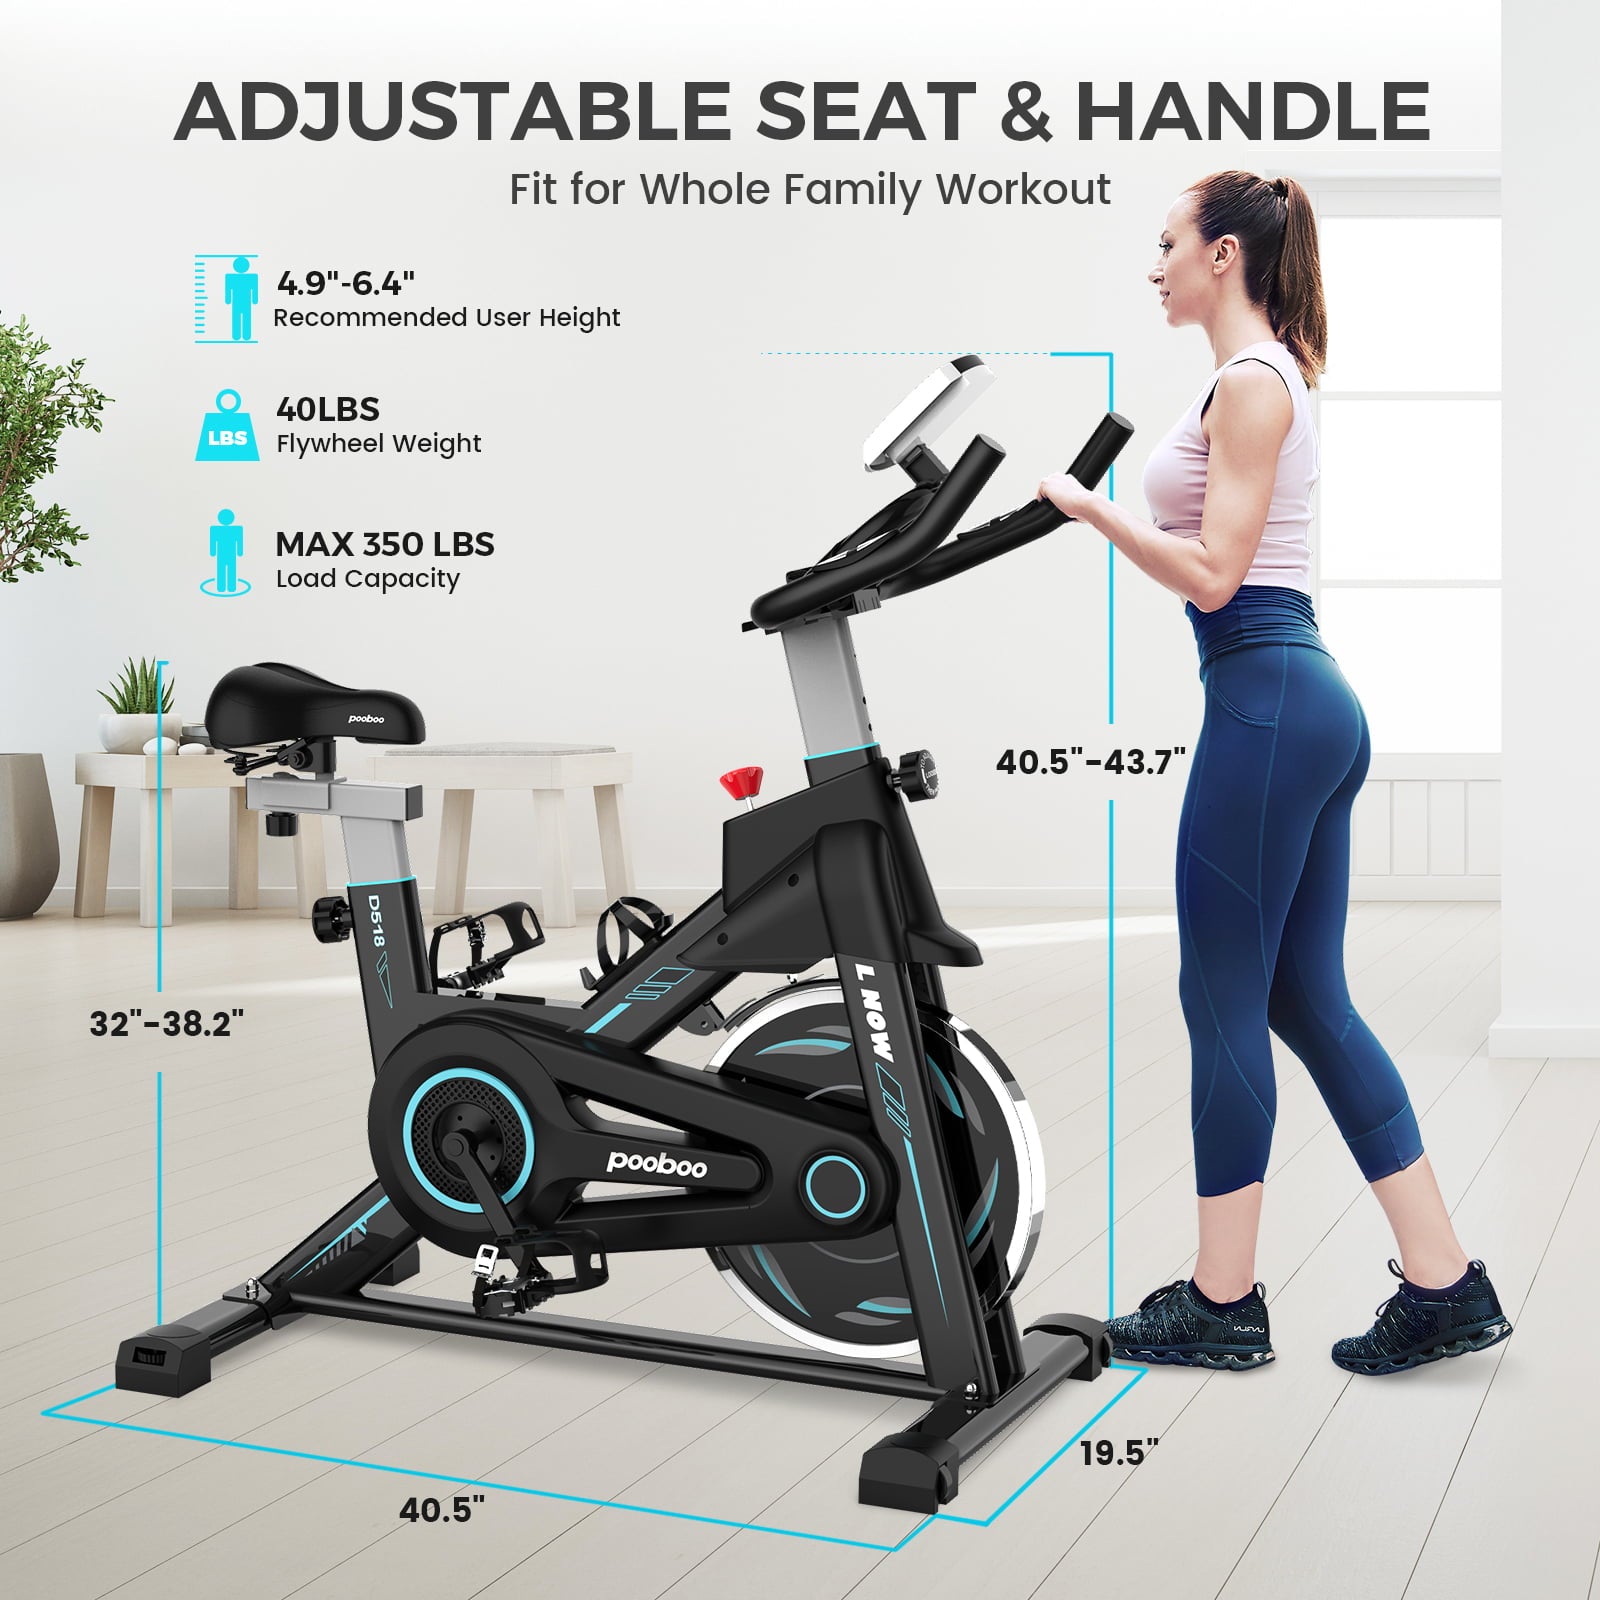 Pooboo Indoor Cycling Bike Magnetic Stationary Exercise Bikes Home Cardio Workout Bicycle Machine